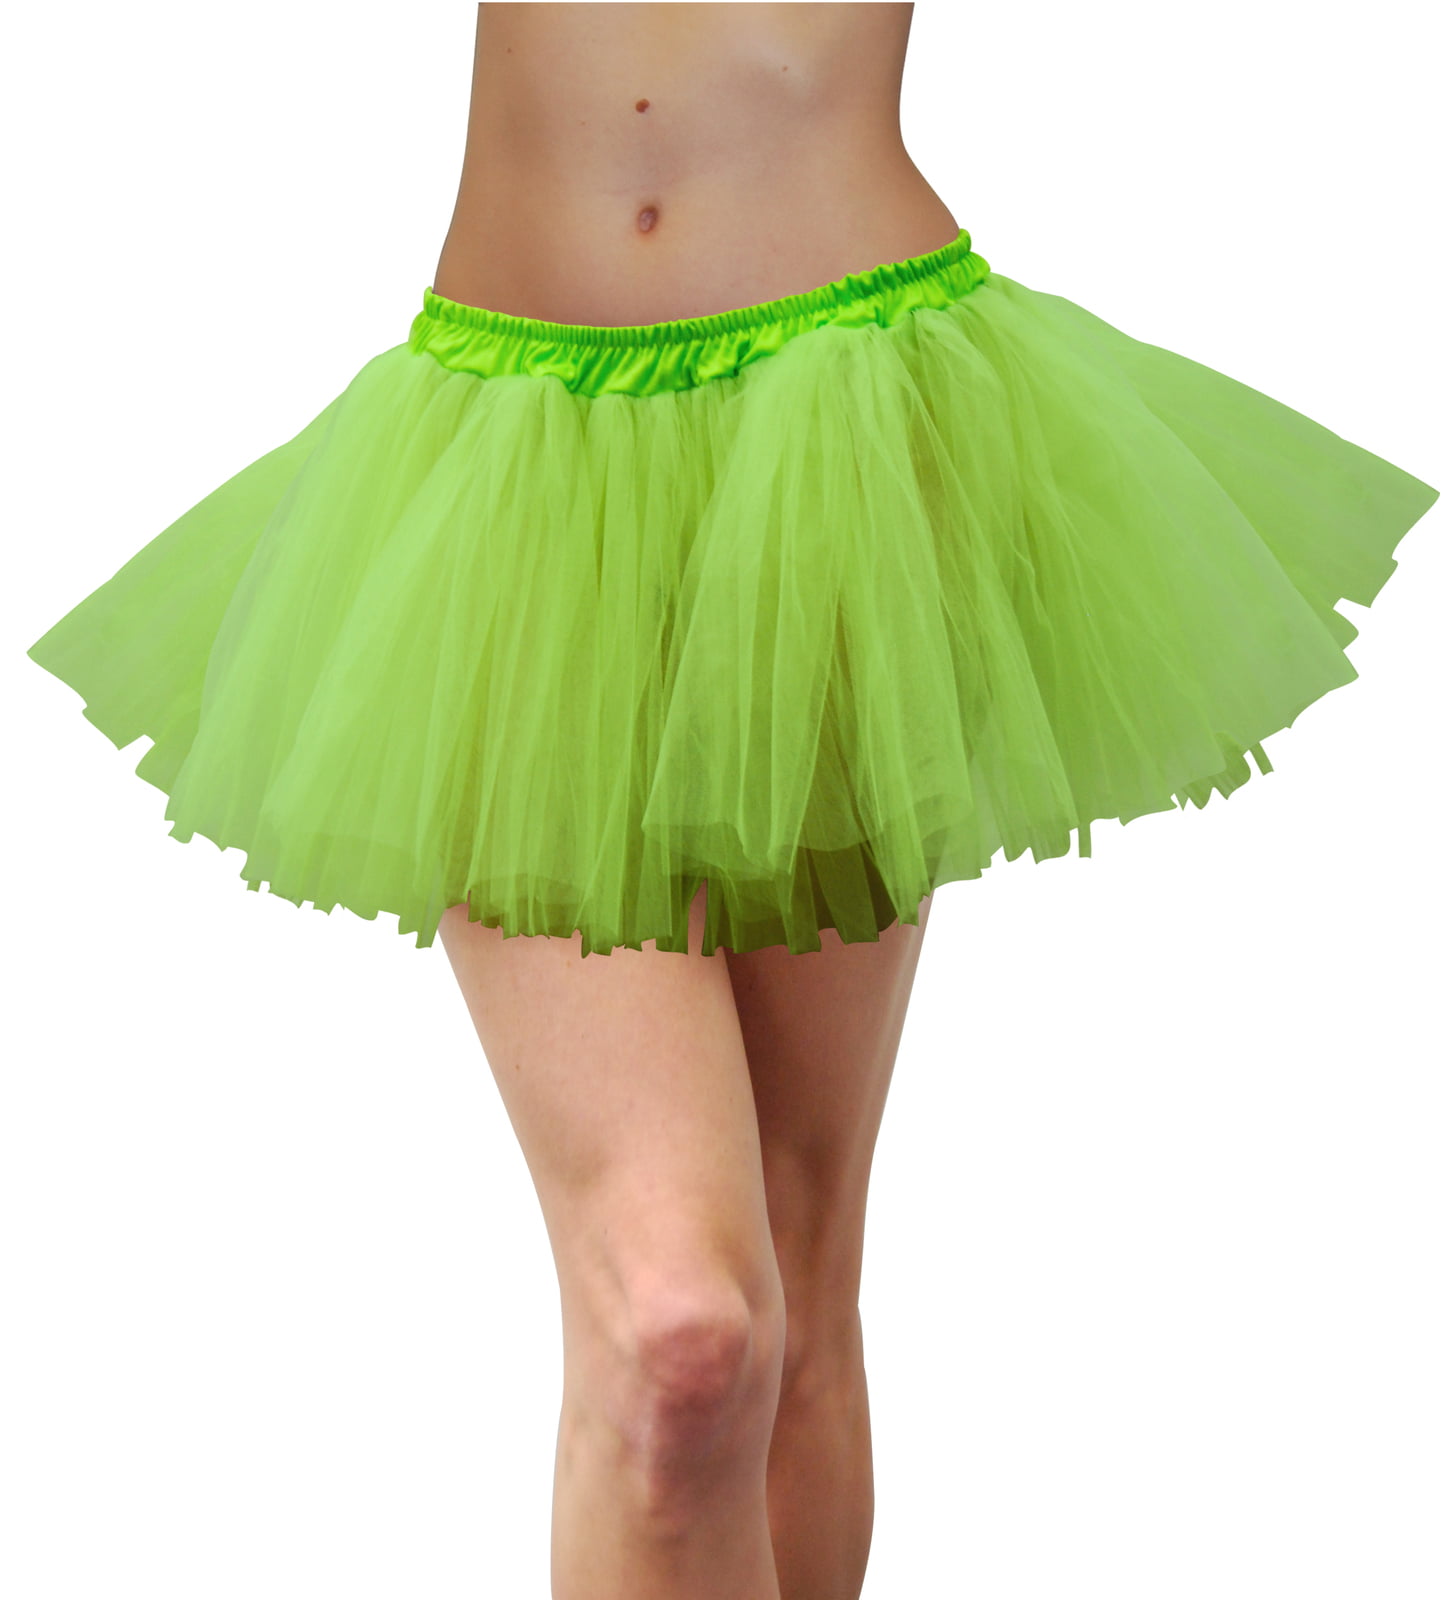 Featured image for “Tulle Tutu 80’s (Fluro Green), Adult”